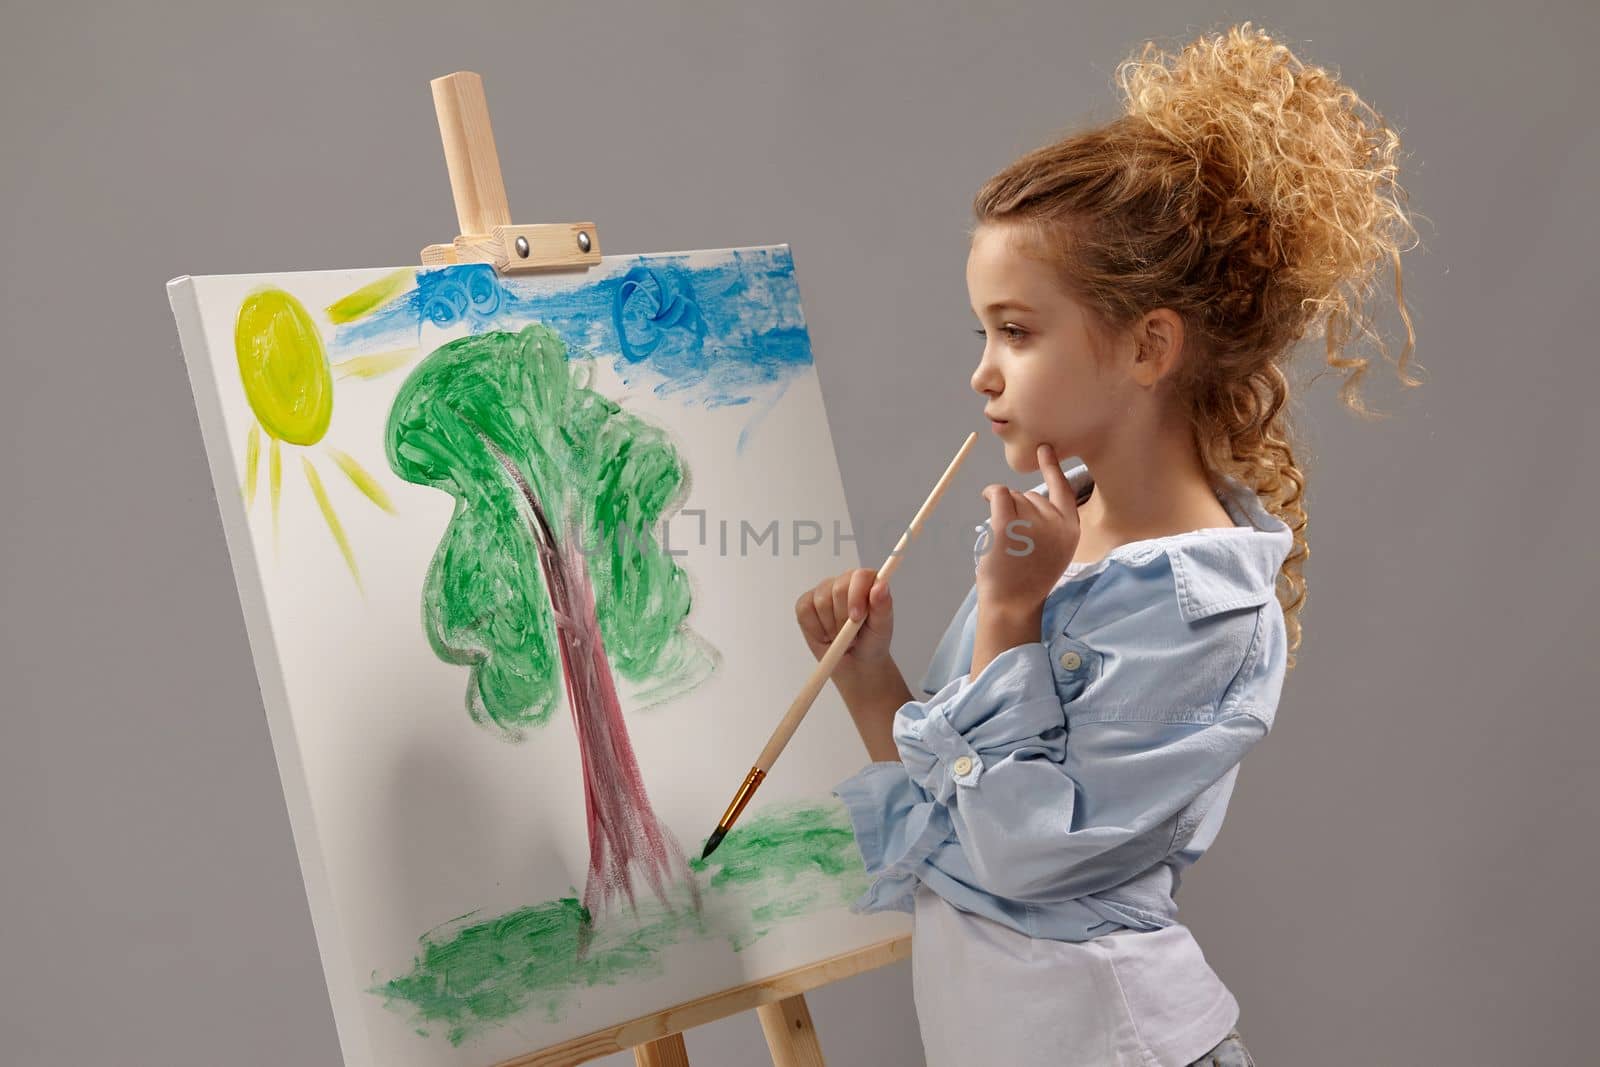 Thoughtful school girl whith a curly blond hair, wearing in a blue shirt and white t-shirt is painting with a watercolor brush on an easel, standing on a gray background.